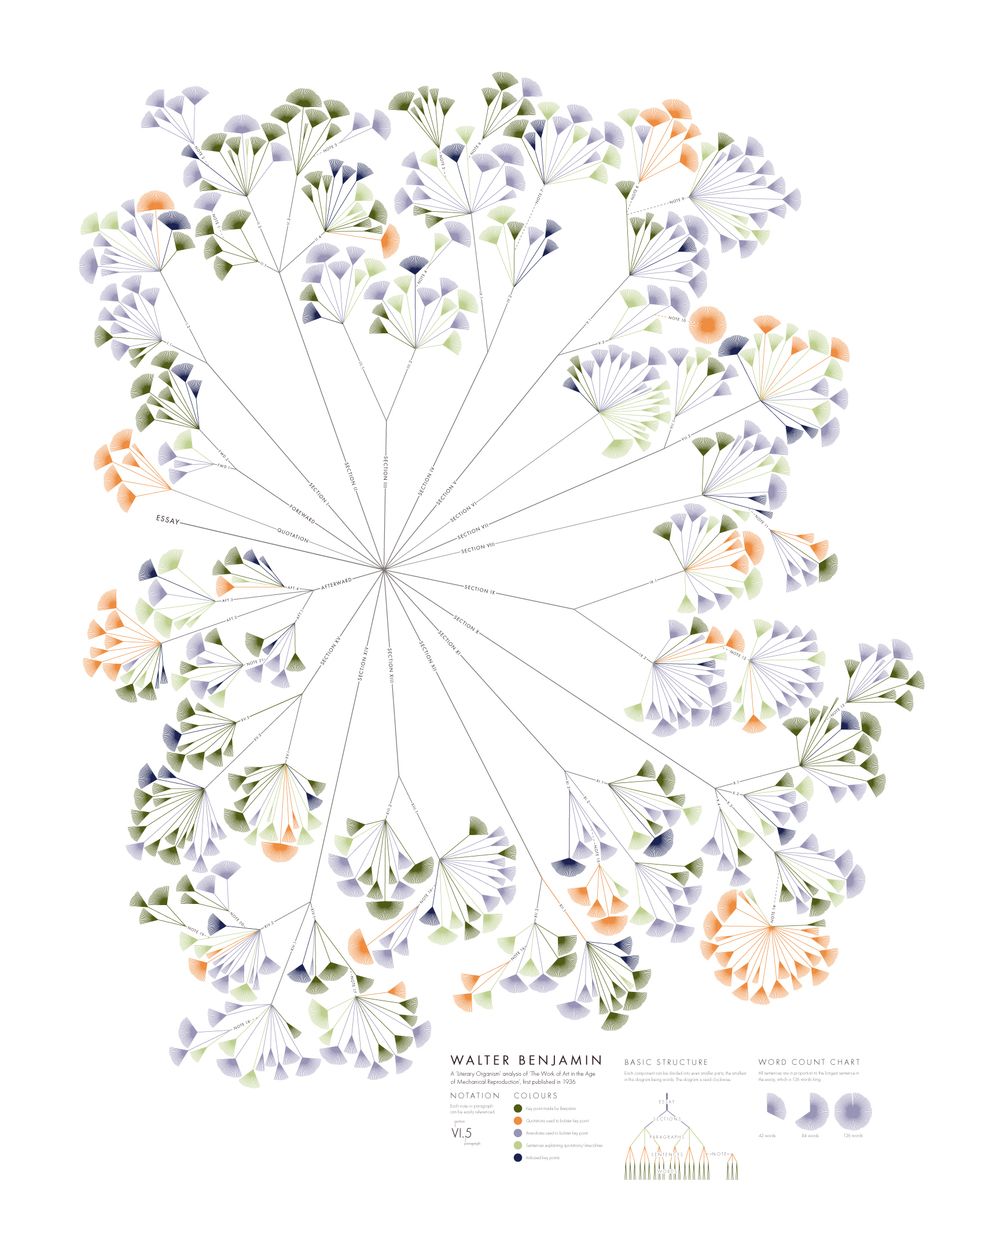 A tree graph. The expanding branches are used as a visualization for data's quantity values.